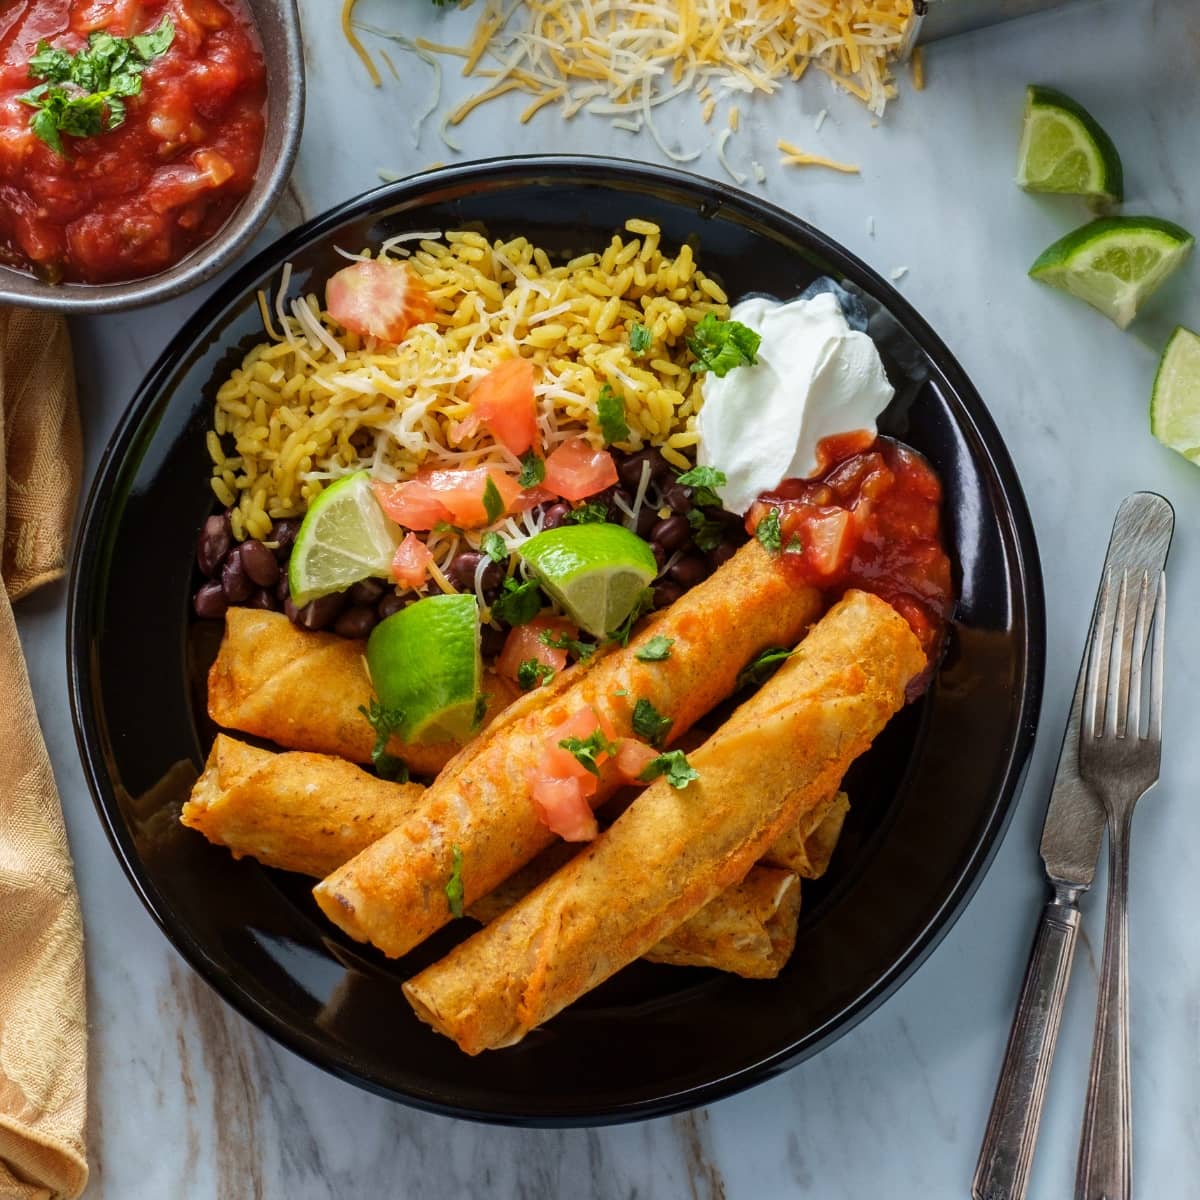 Taquitos Served With Rice, Cheese, Beans, Limes, Sour Cream, and Salsa on a Plate with Knife and Fork Beside It